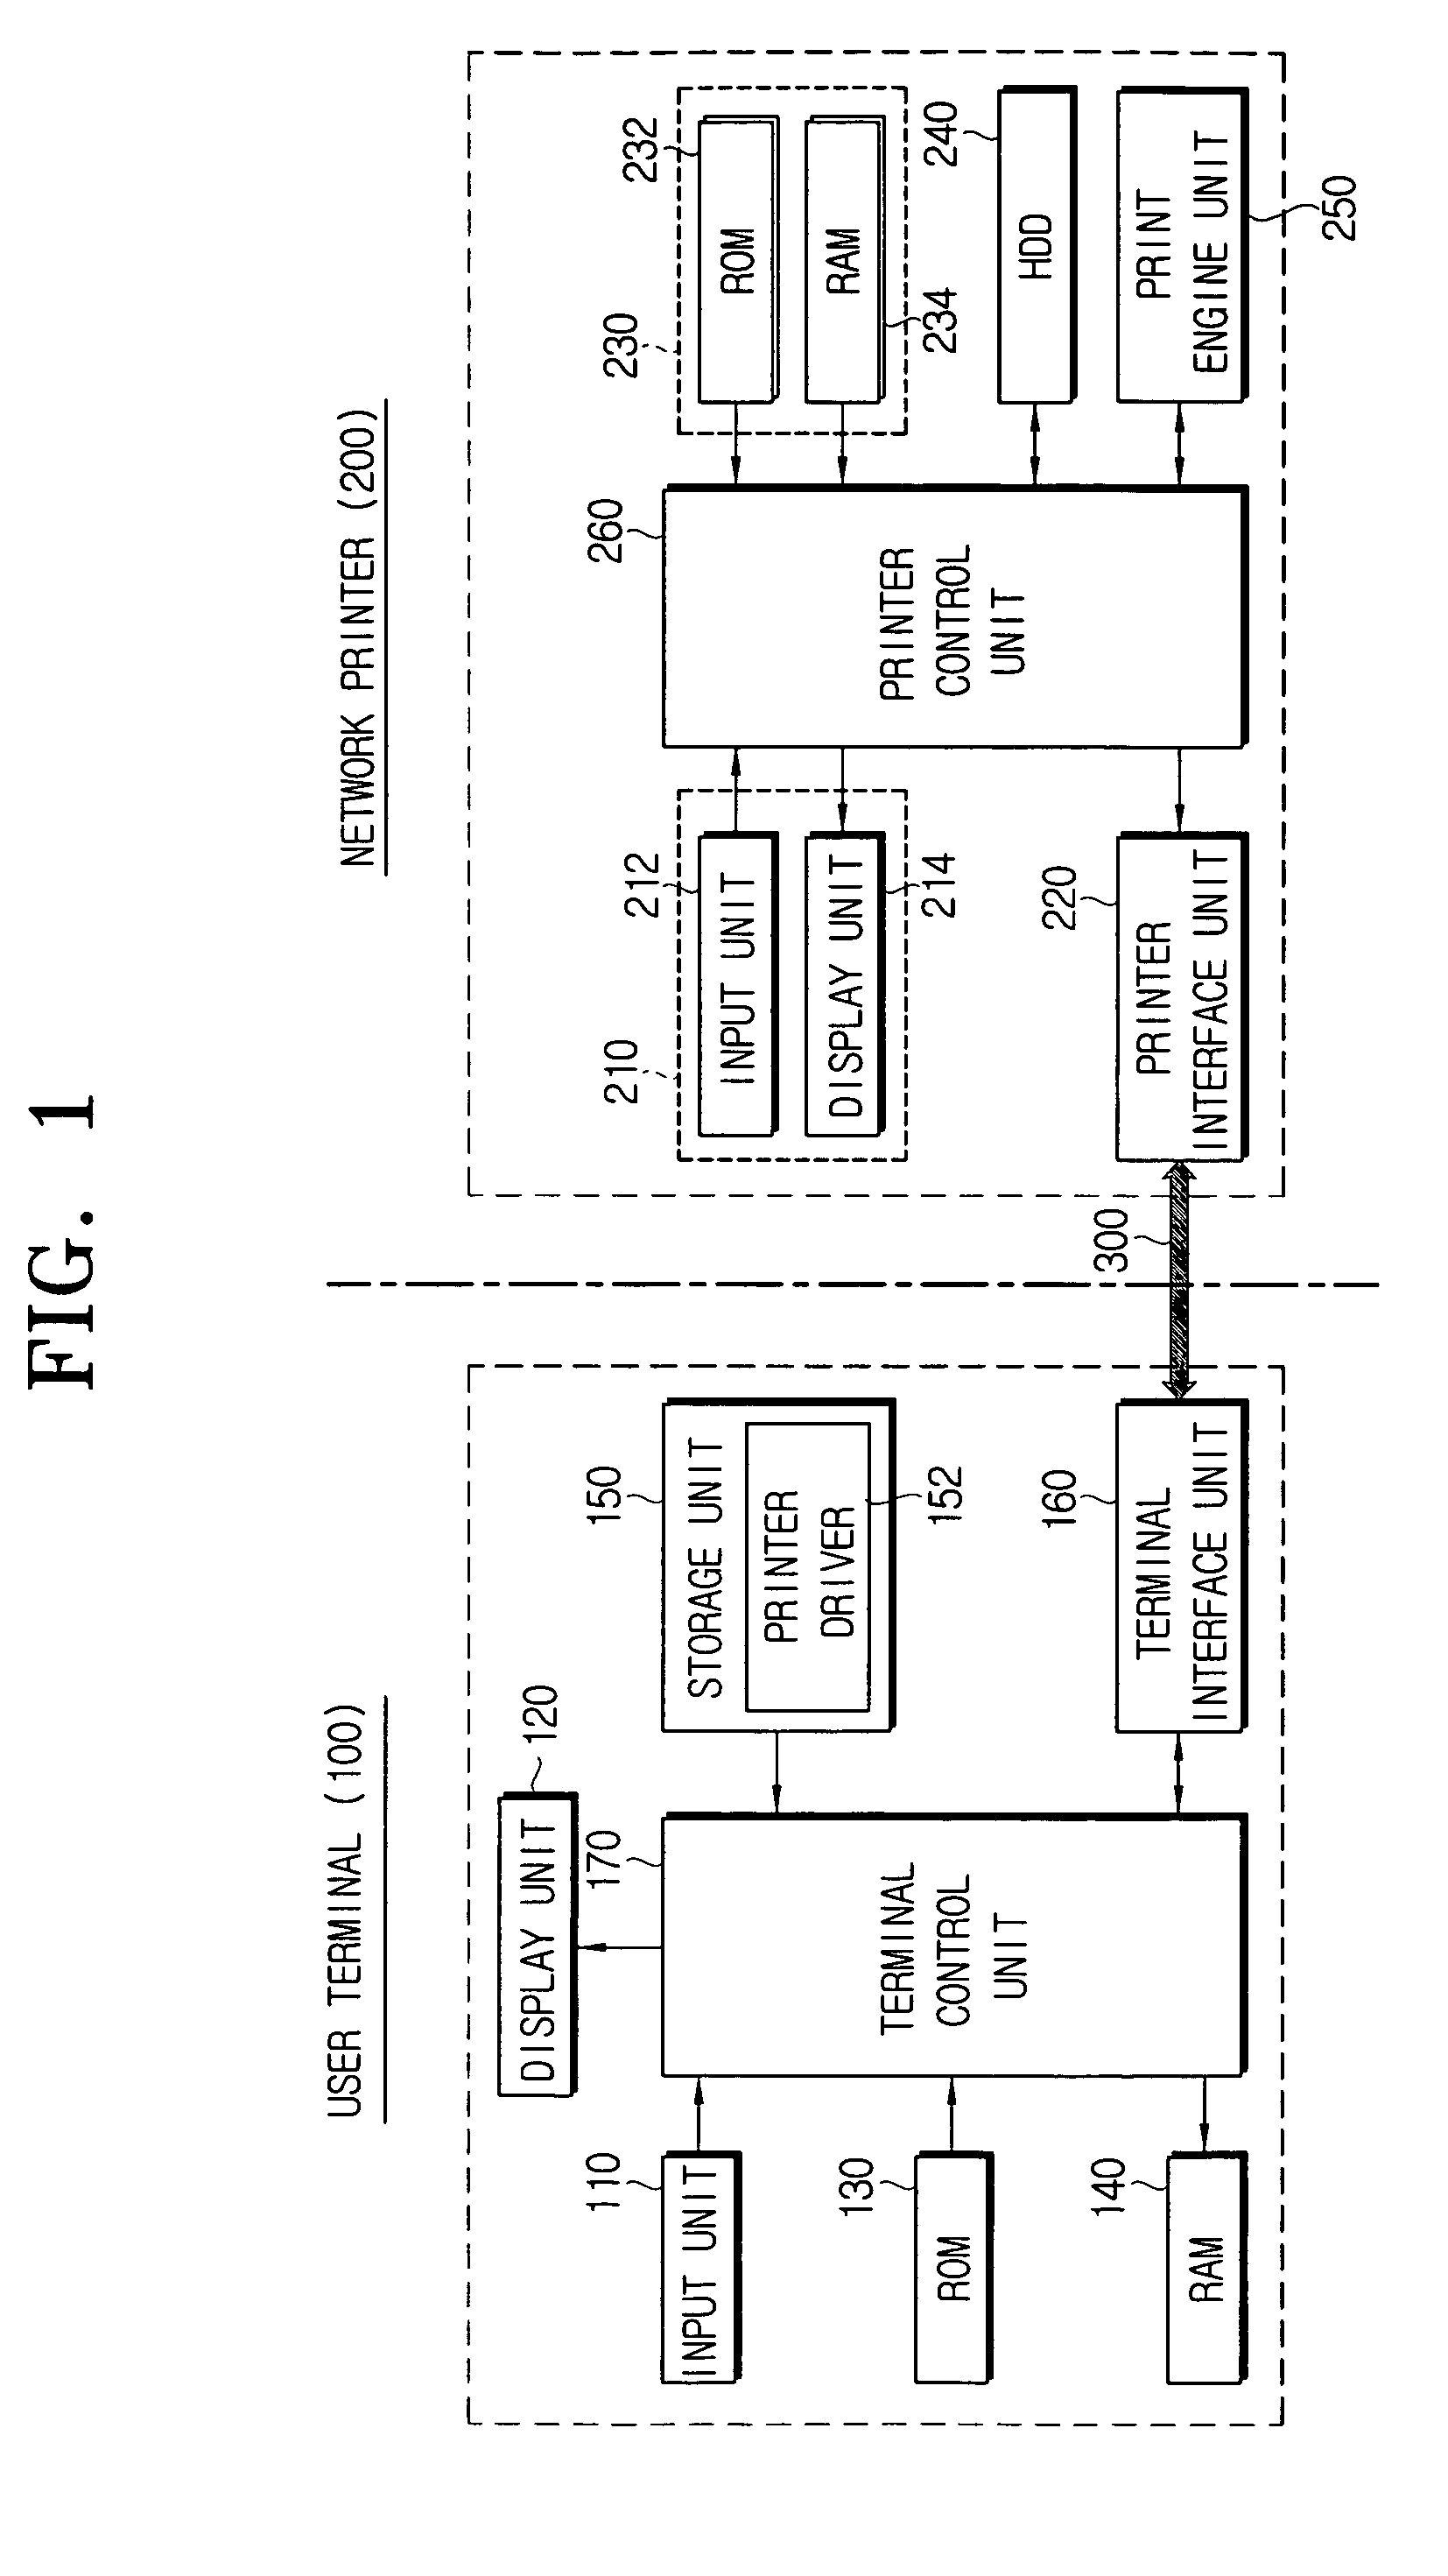 Network-based image forming device and print secure method thereof